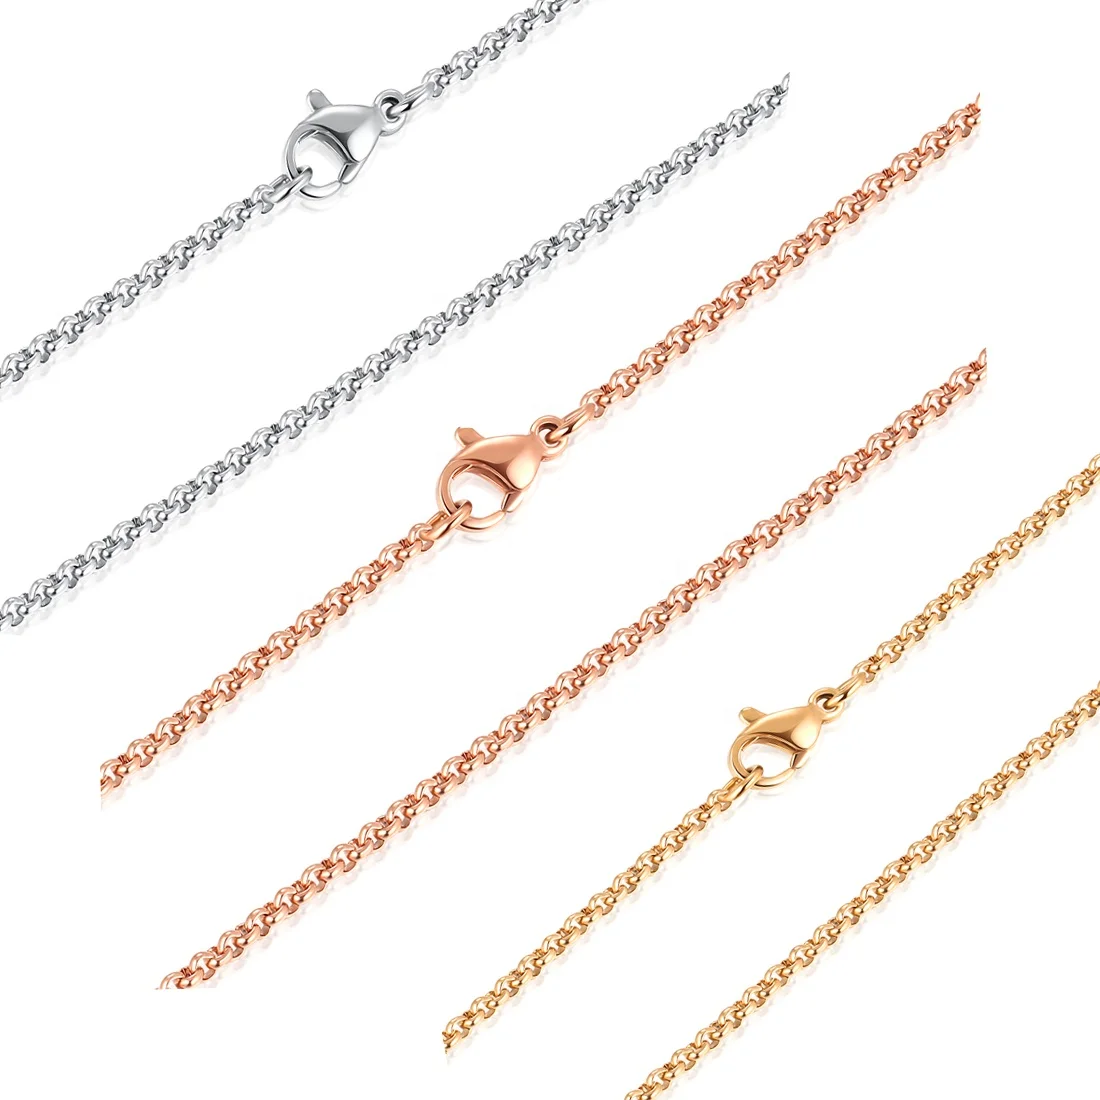 

Wholesale Jewelry Stainless Steel Rolo Chain Necklace Men Women Round Link Necklace Chains Gold Silver Rose Gold 16-36 Inches